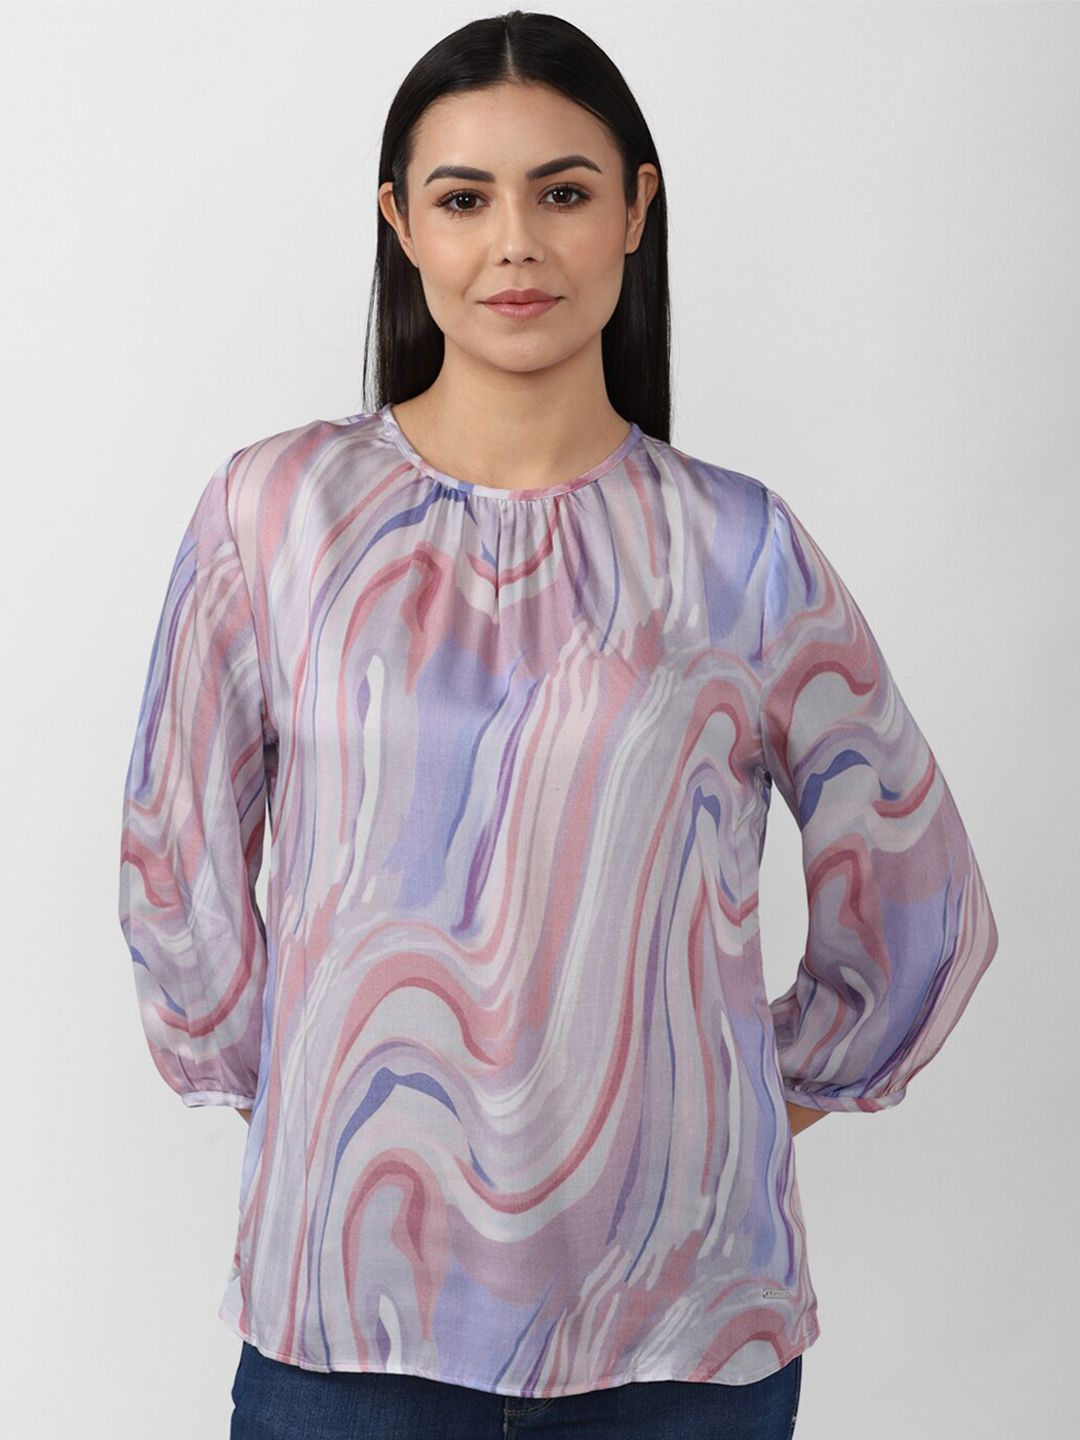 Van Heusen Woman Pink & Blue Modal Abstract Print Top Price in India